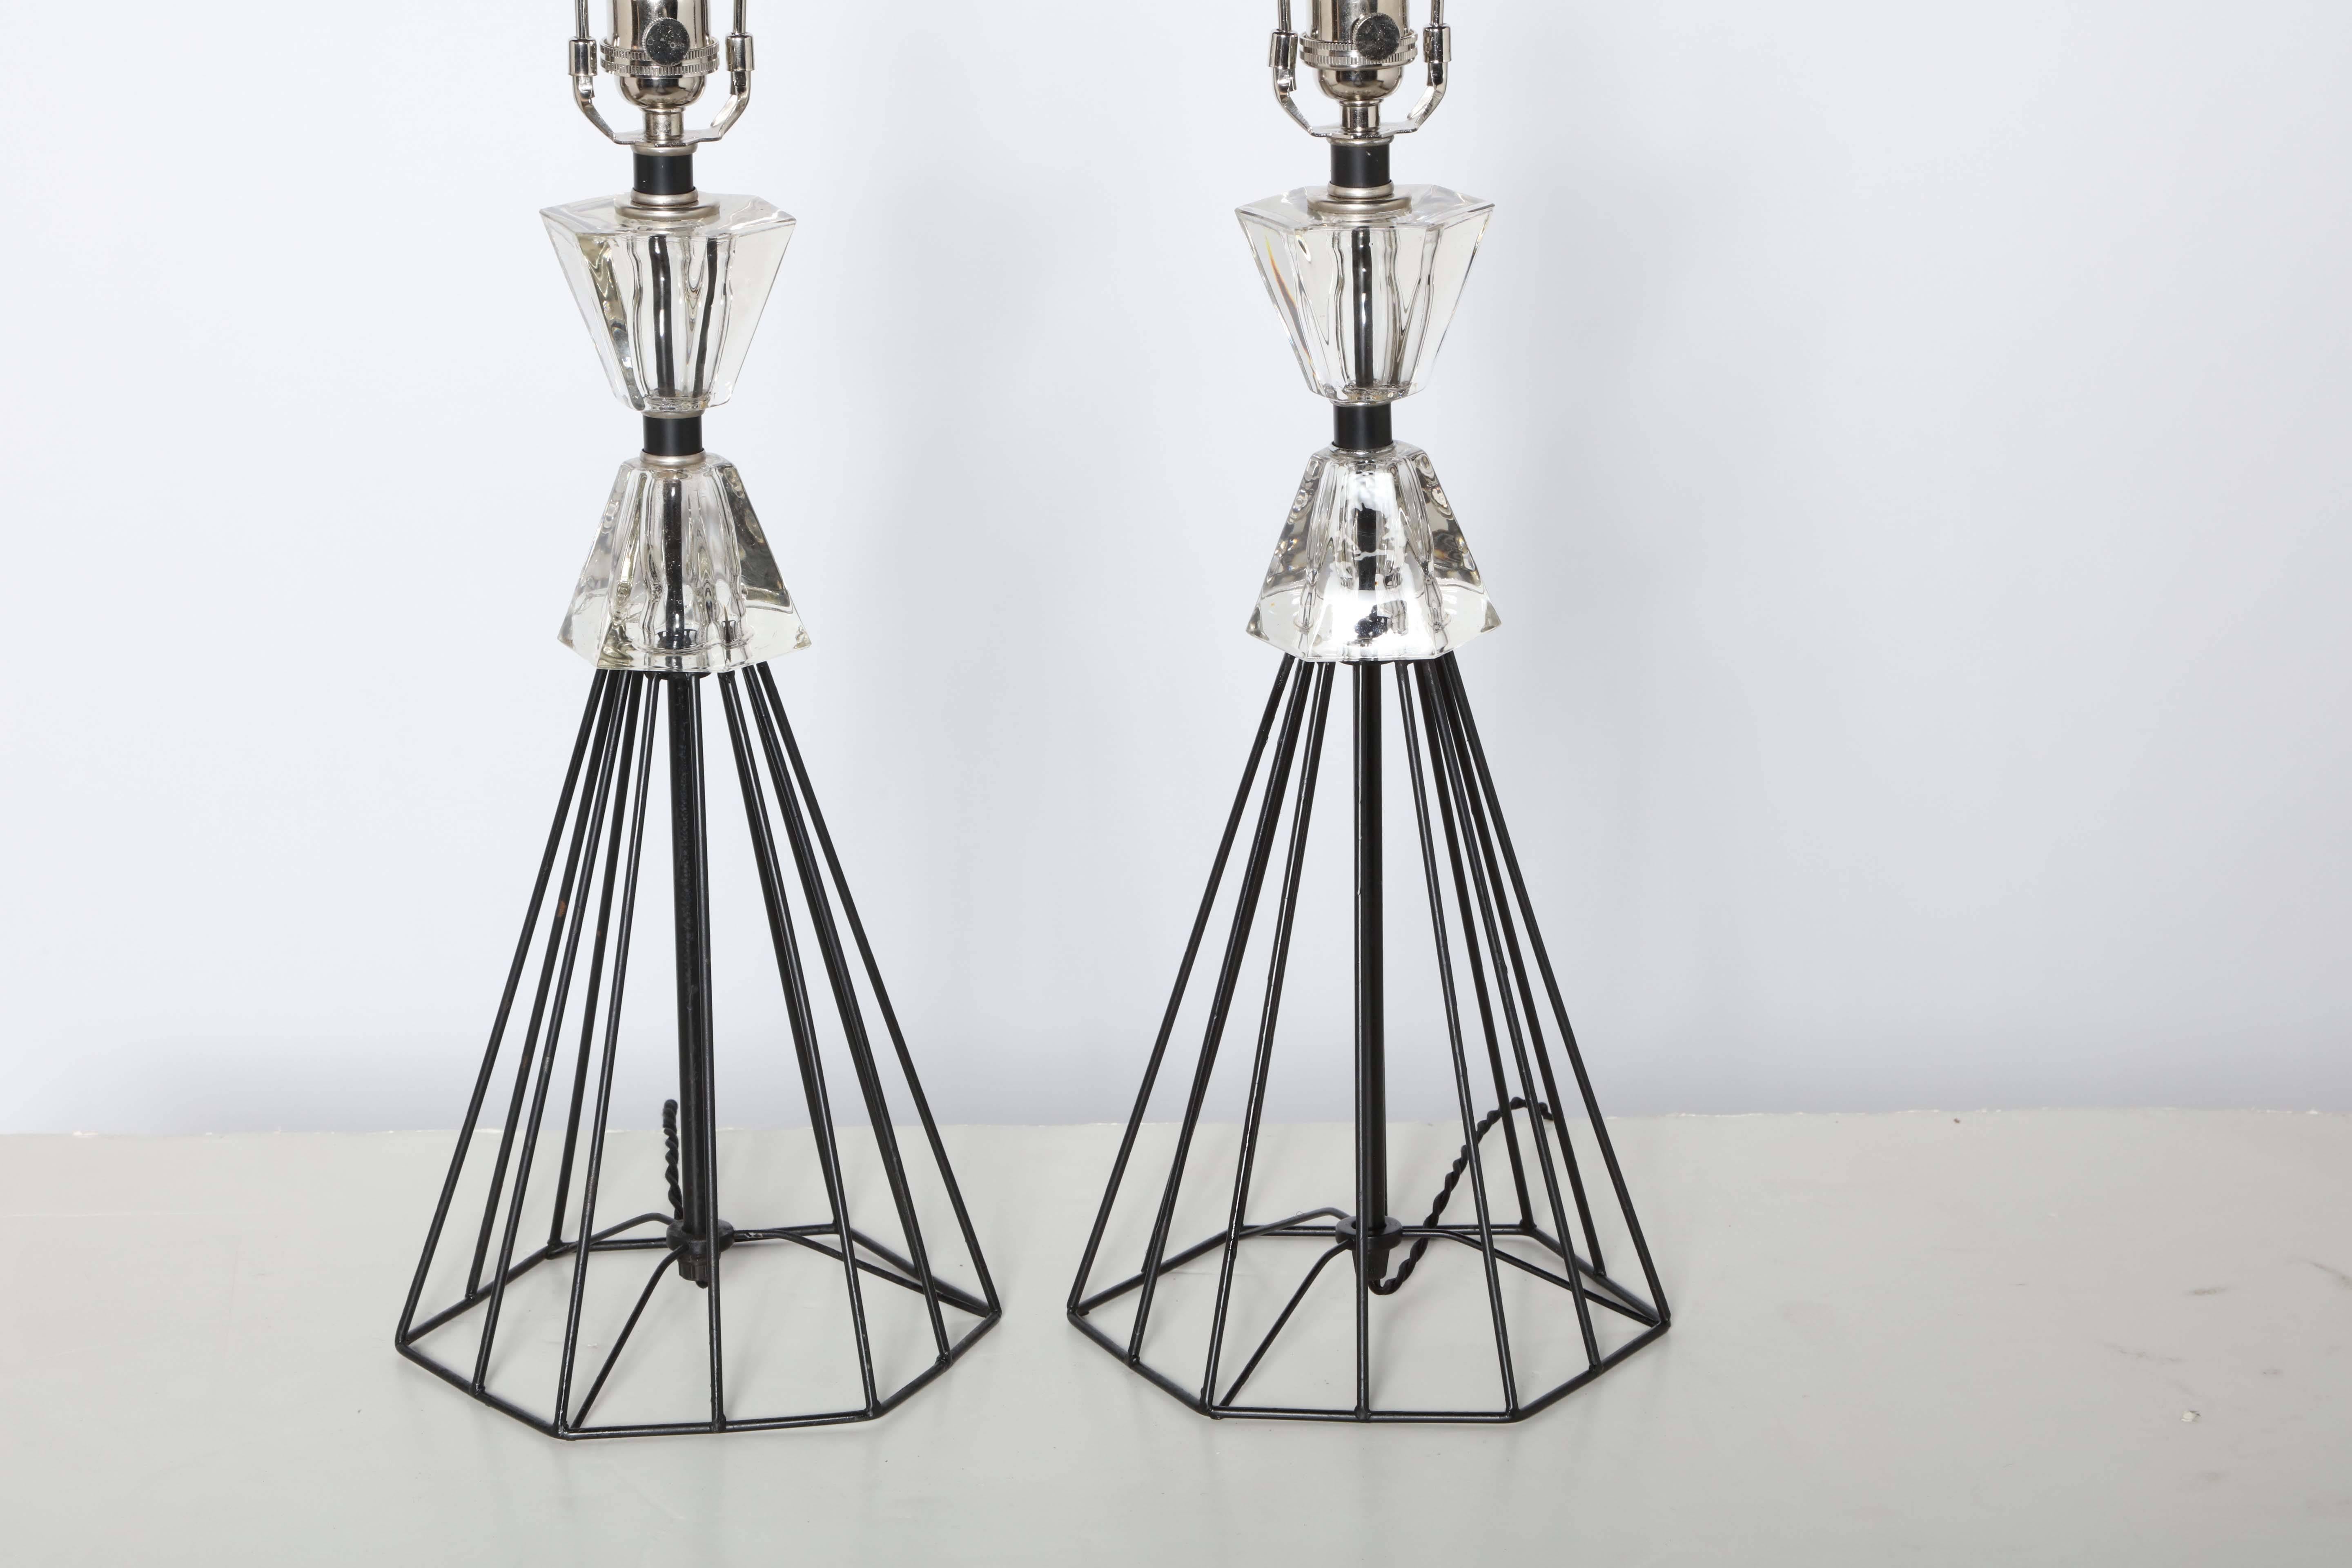 Pair of 1950s Hollywood Regency black wire and crystal table lamps. Featuring a black wire hexagonal base, triangular form framework and
two-piece, triangular, hourglass crystal detail. Great as boudoir lamps,
vanity lamps, bedside lamps or